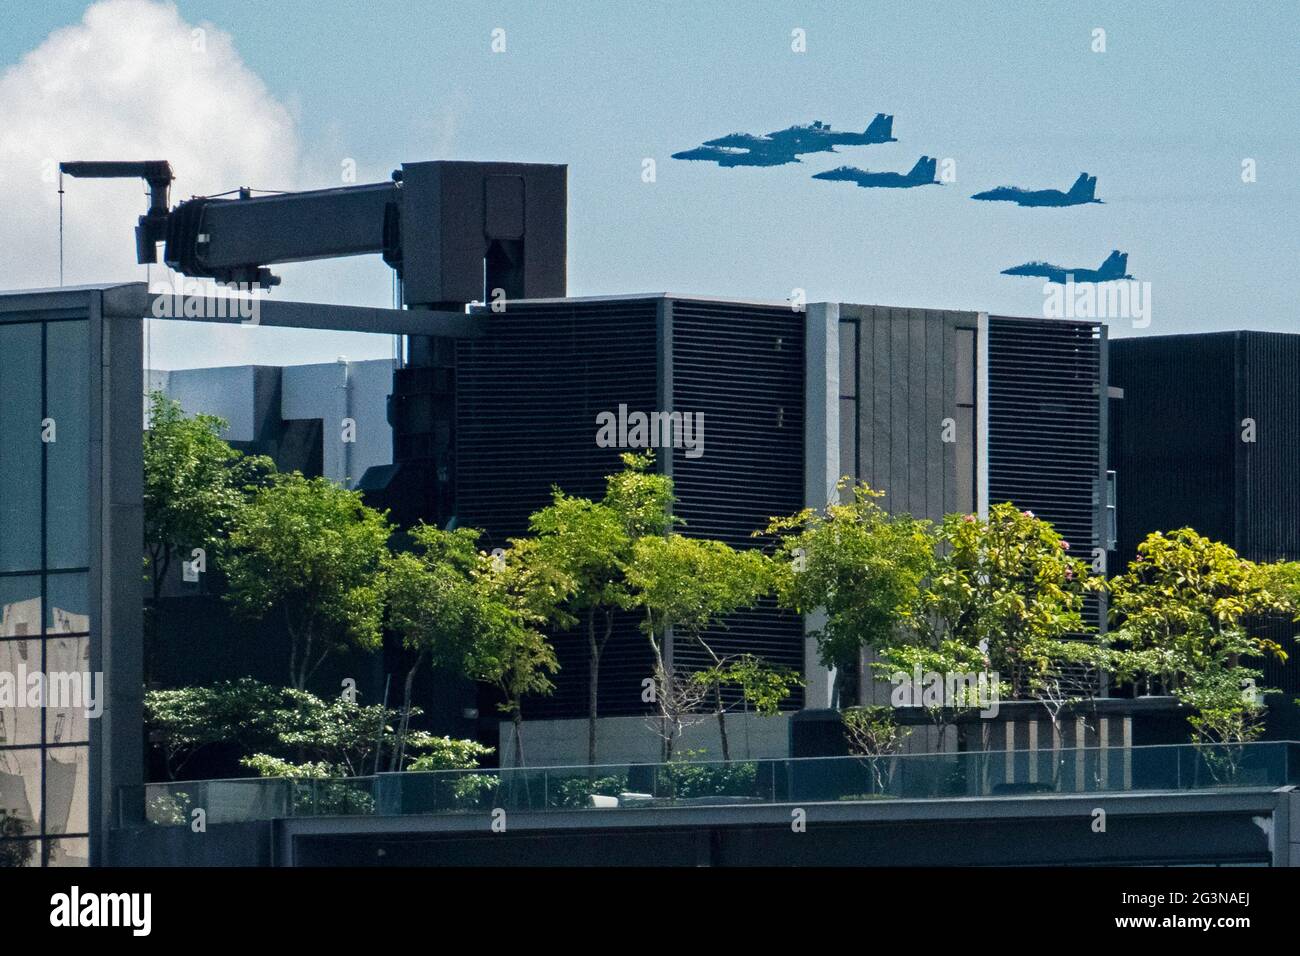 Singapore. 17th June, 2021. Aircrafts fly in formation as part of the rehearsal for the upcoming National Day Parade flying display in Singapore on June 17, 2021. Singapore celebrates its independence day every year on Aug. 9. Credit: Then Chih Wey/Xinhua/Alamy Live News Stock Photo